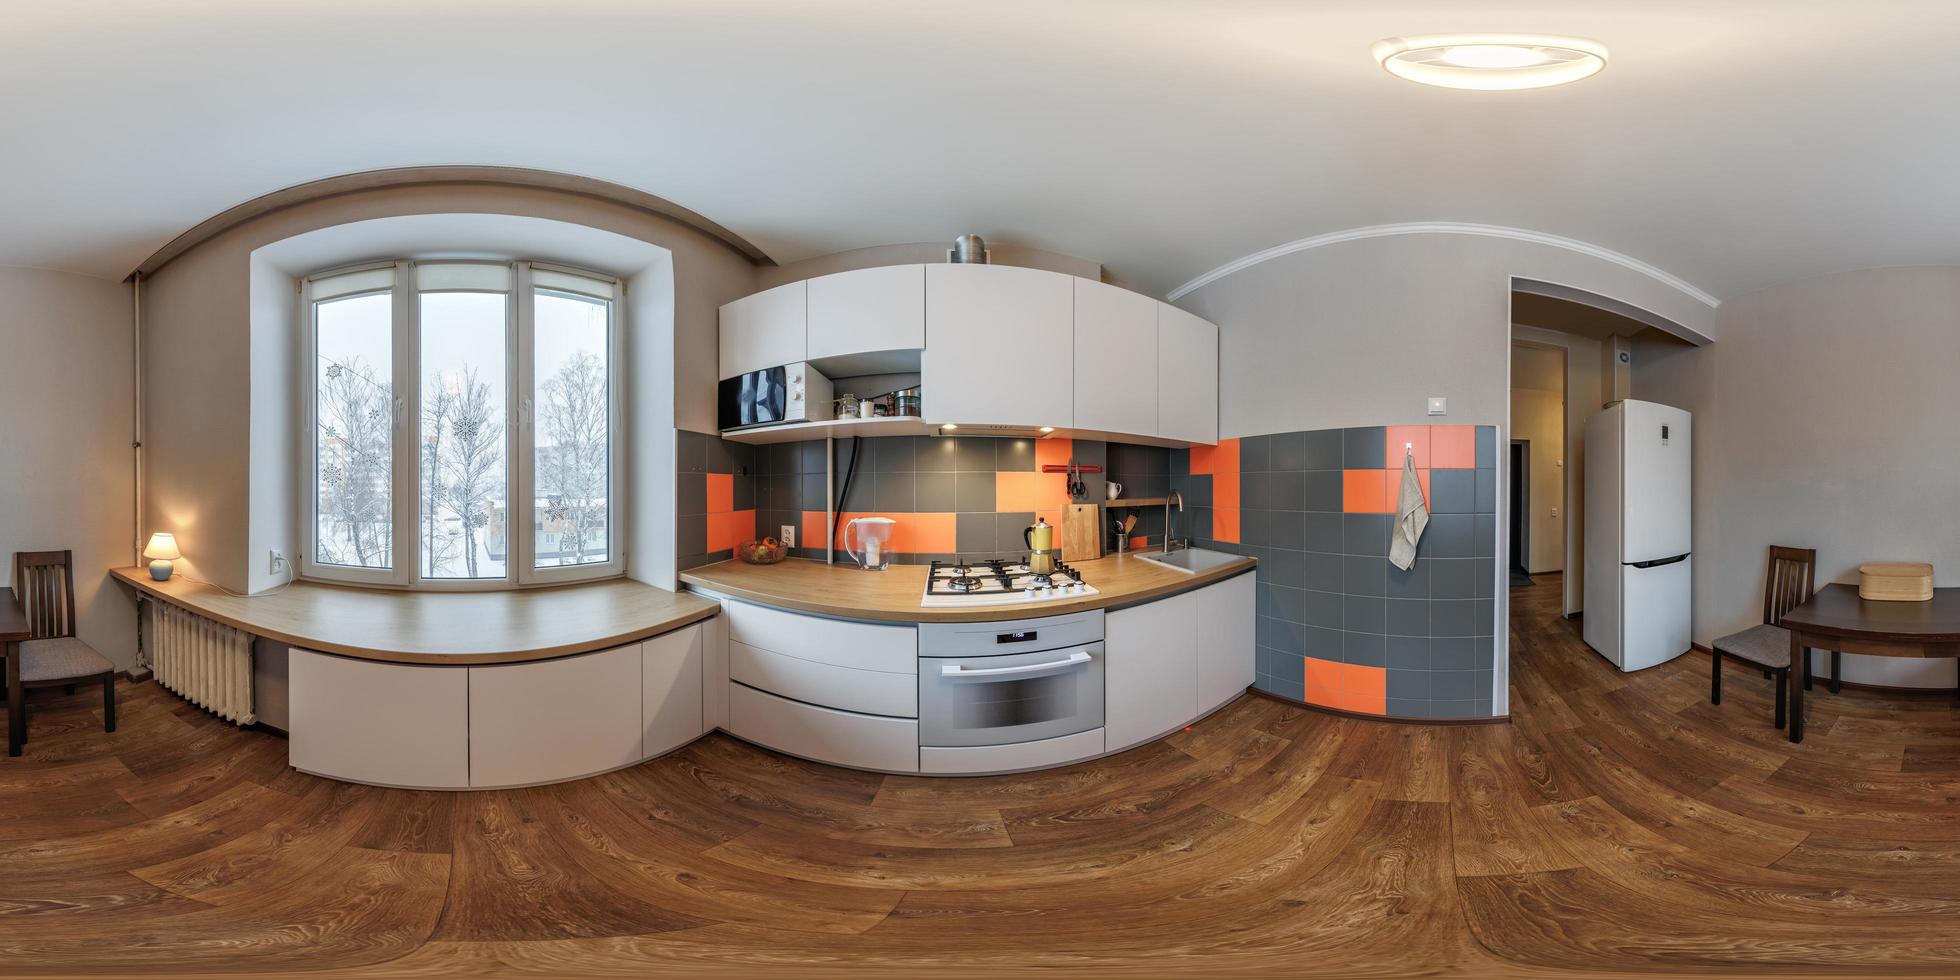 full seamless spherical hdri 360 panorama view in interior of small kitchen in modern flat apartments with furniture in equirectangular projection, VR content photo